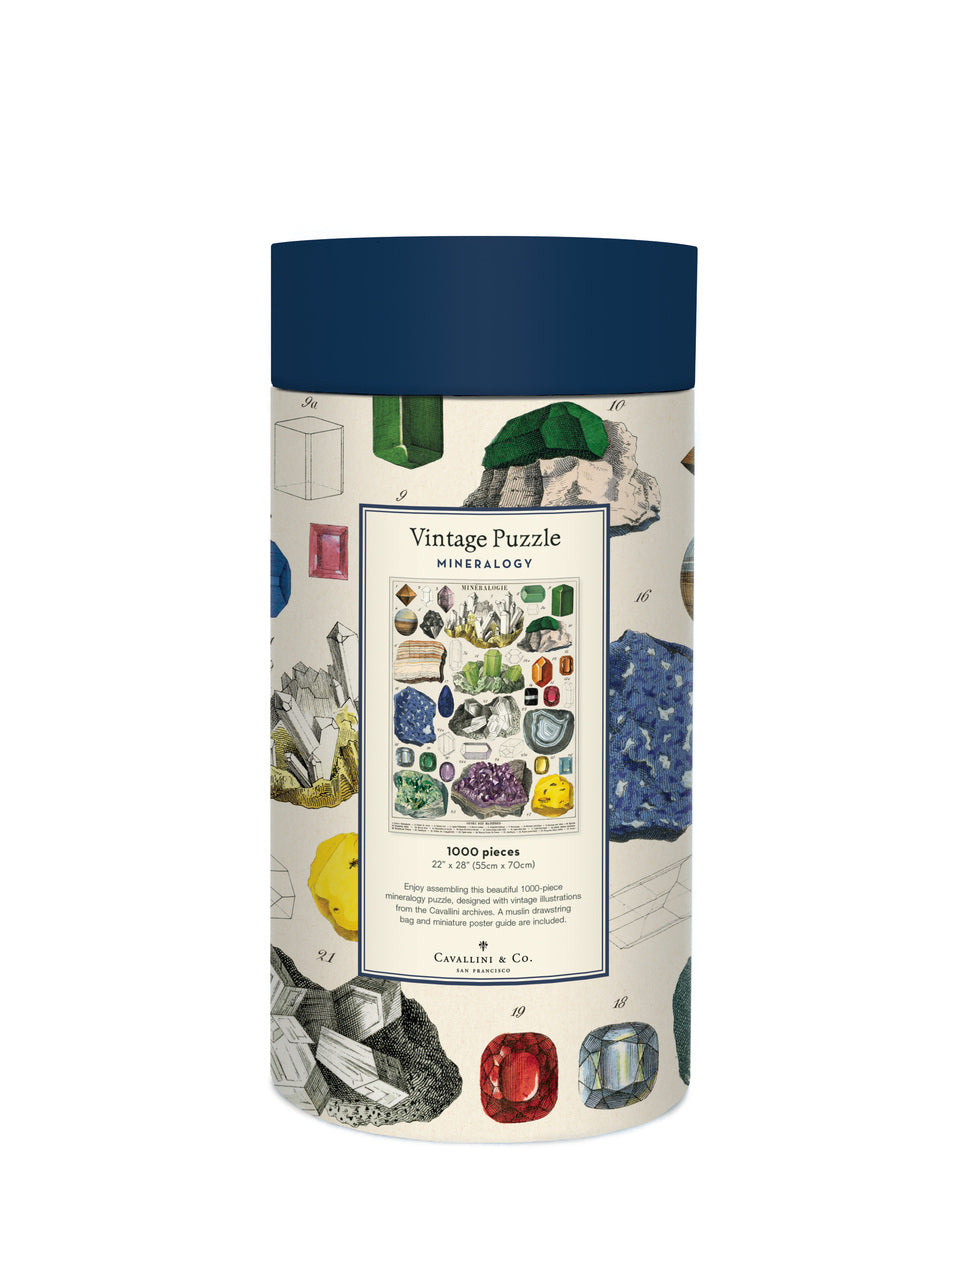 All puzzles are packaged in a 10 inch long cardboard tube, with puzzle pieces safely stored in a muslin bag inside.